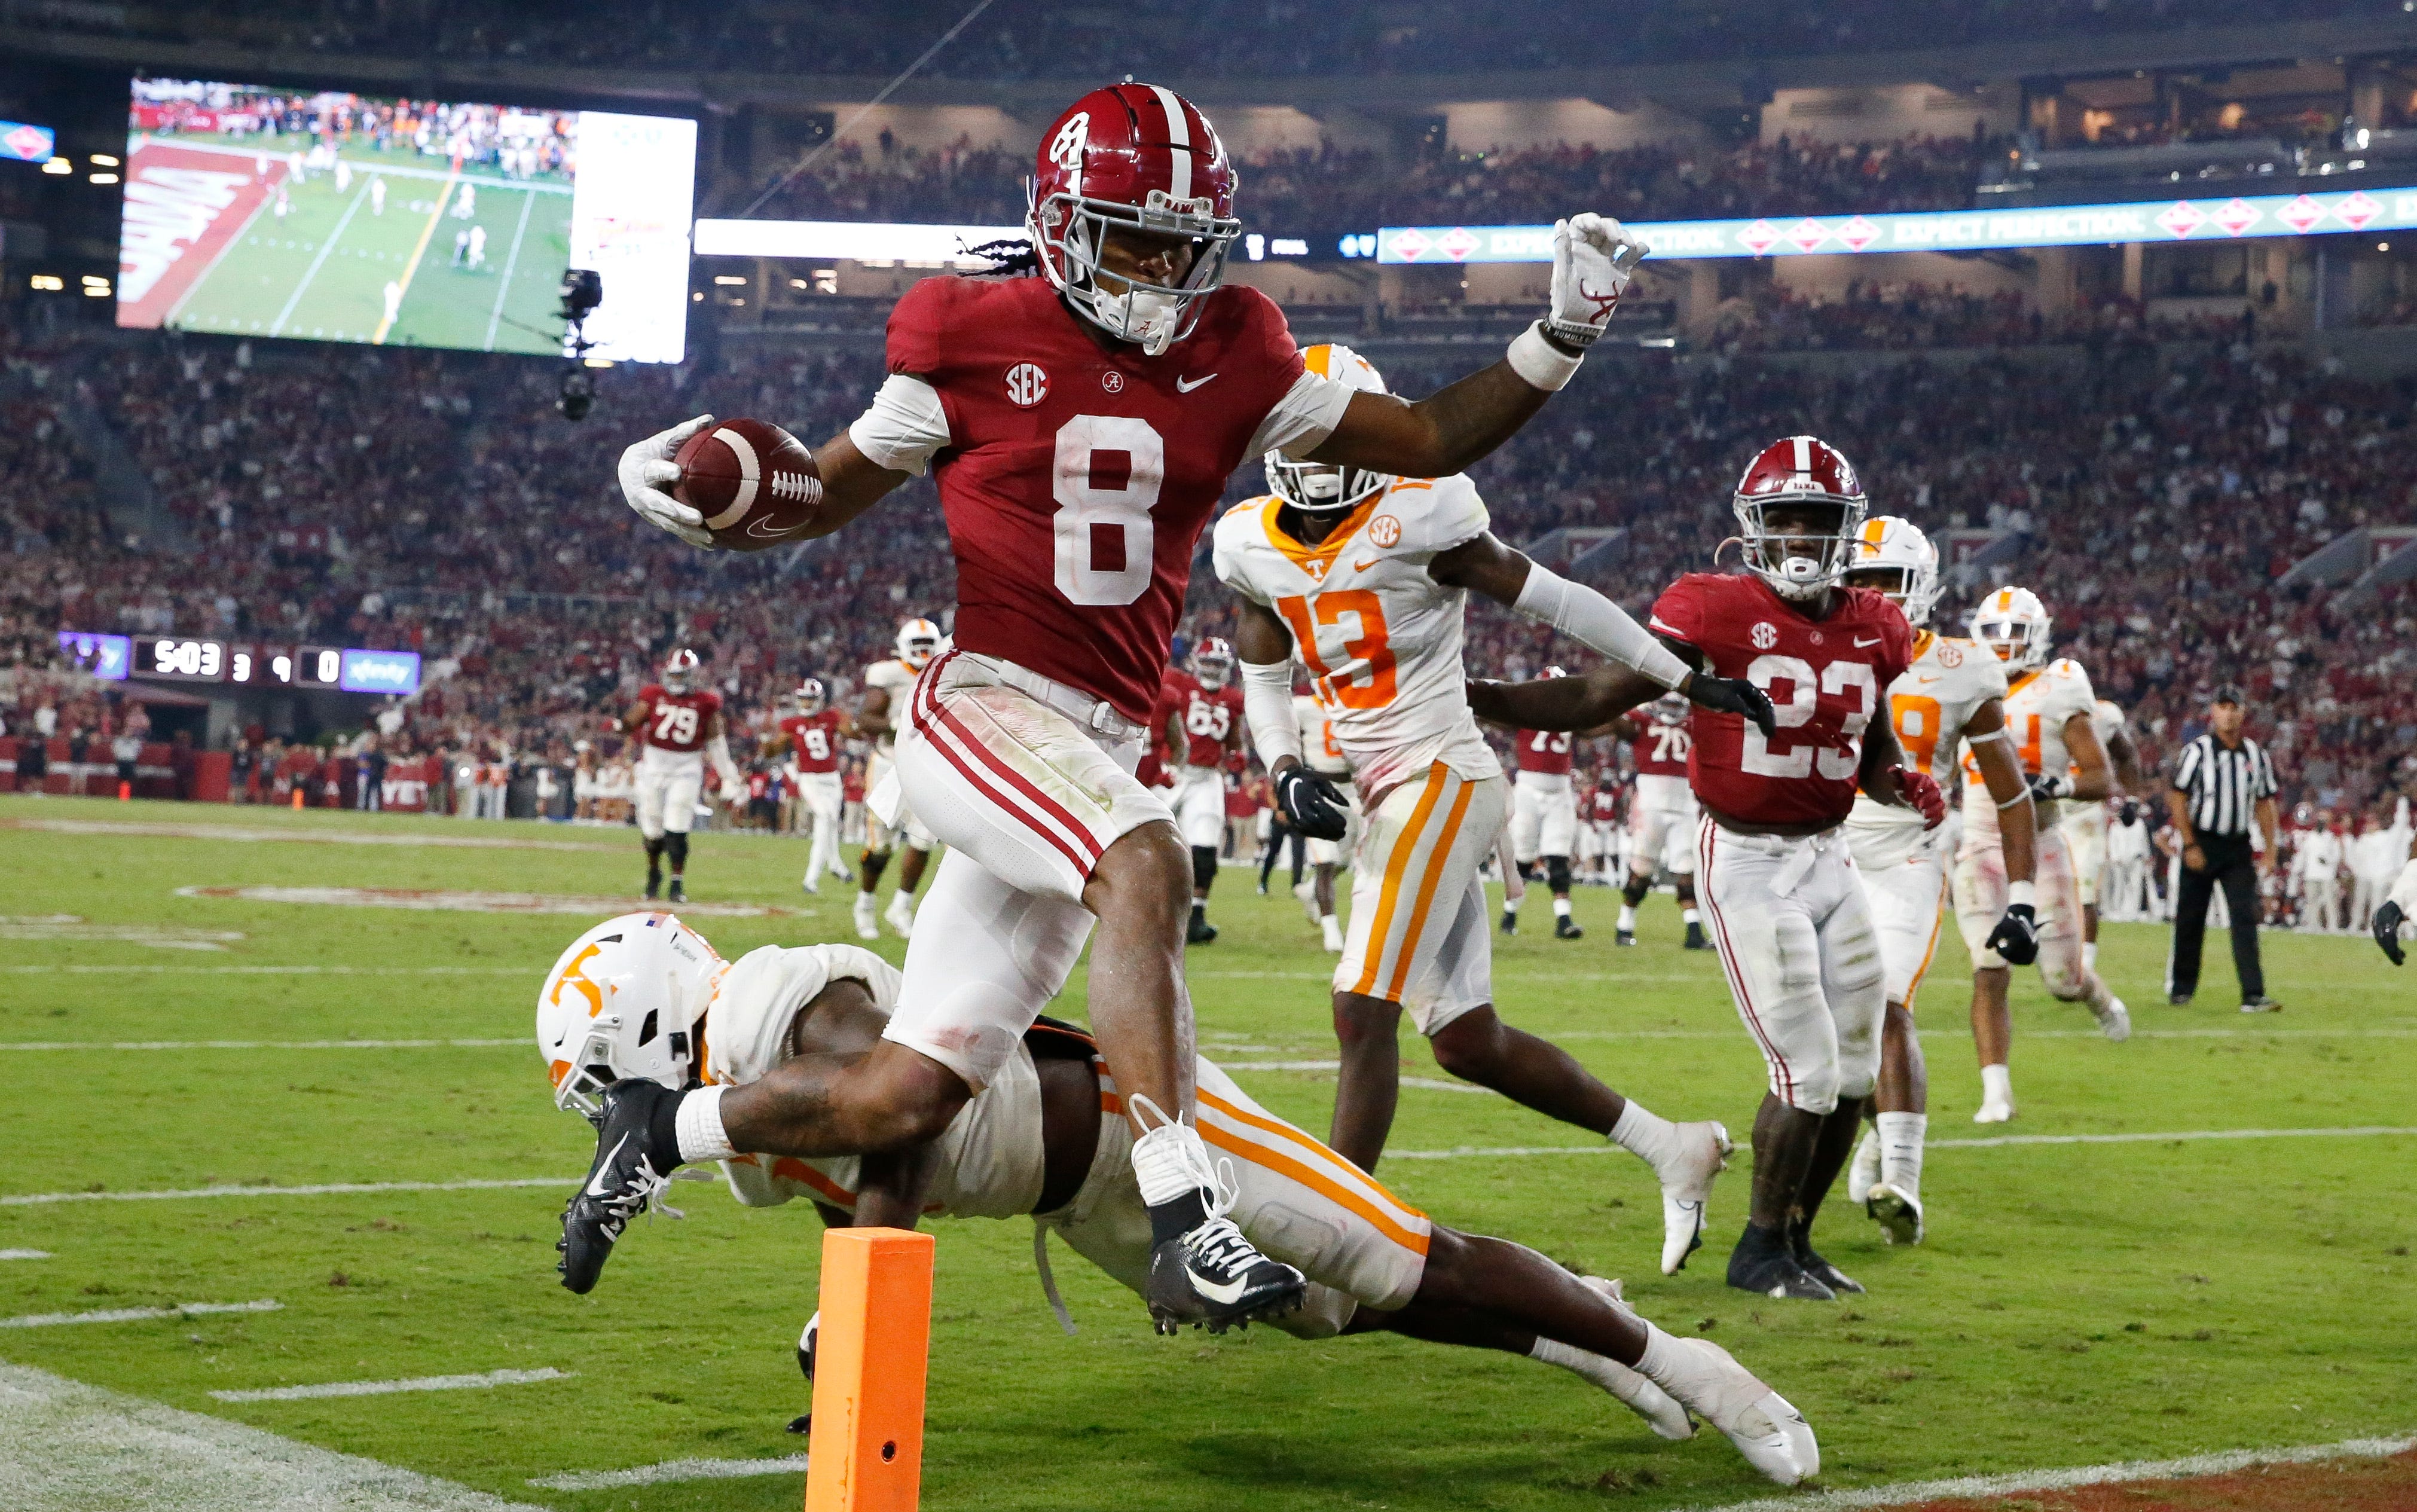 College Football Playoff rankings 2021: Two SEC teams in initial top 4